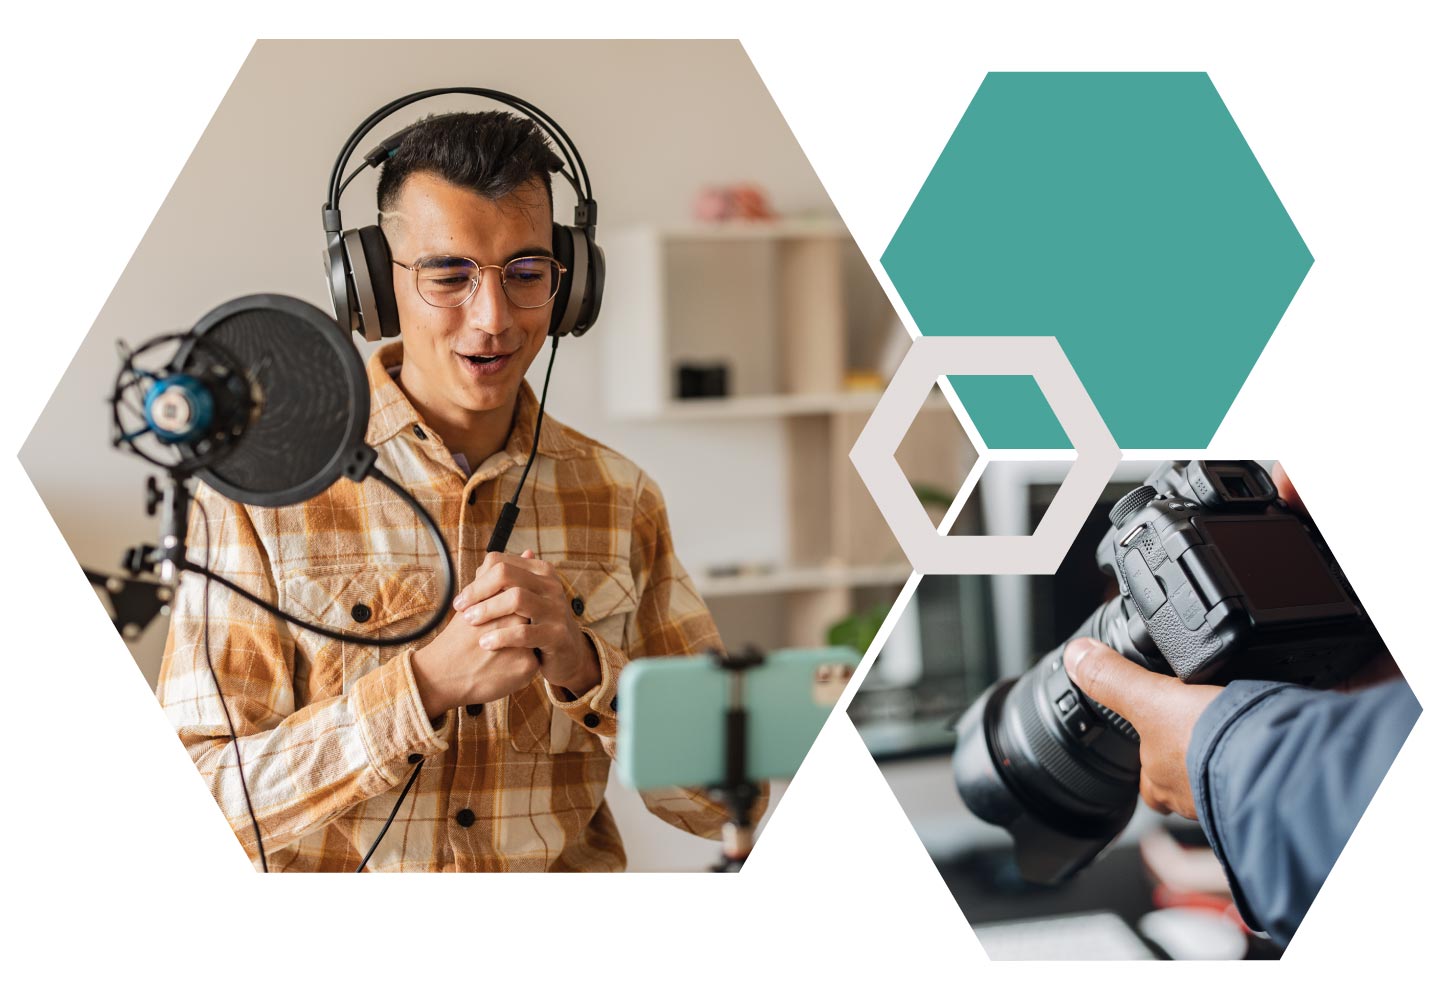 Collage of images, man with headphones speaking into a microphone, person holding a camera, teal hexagon